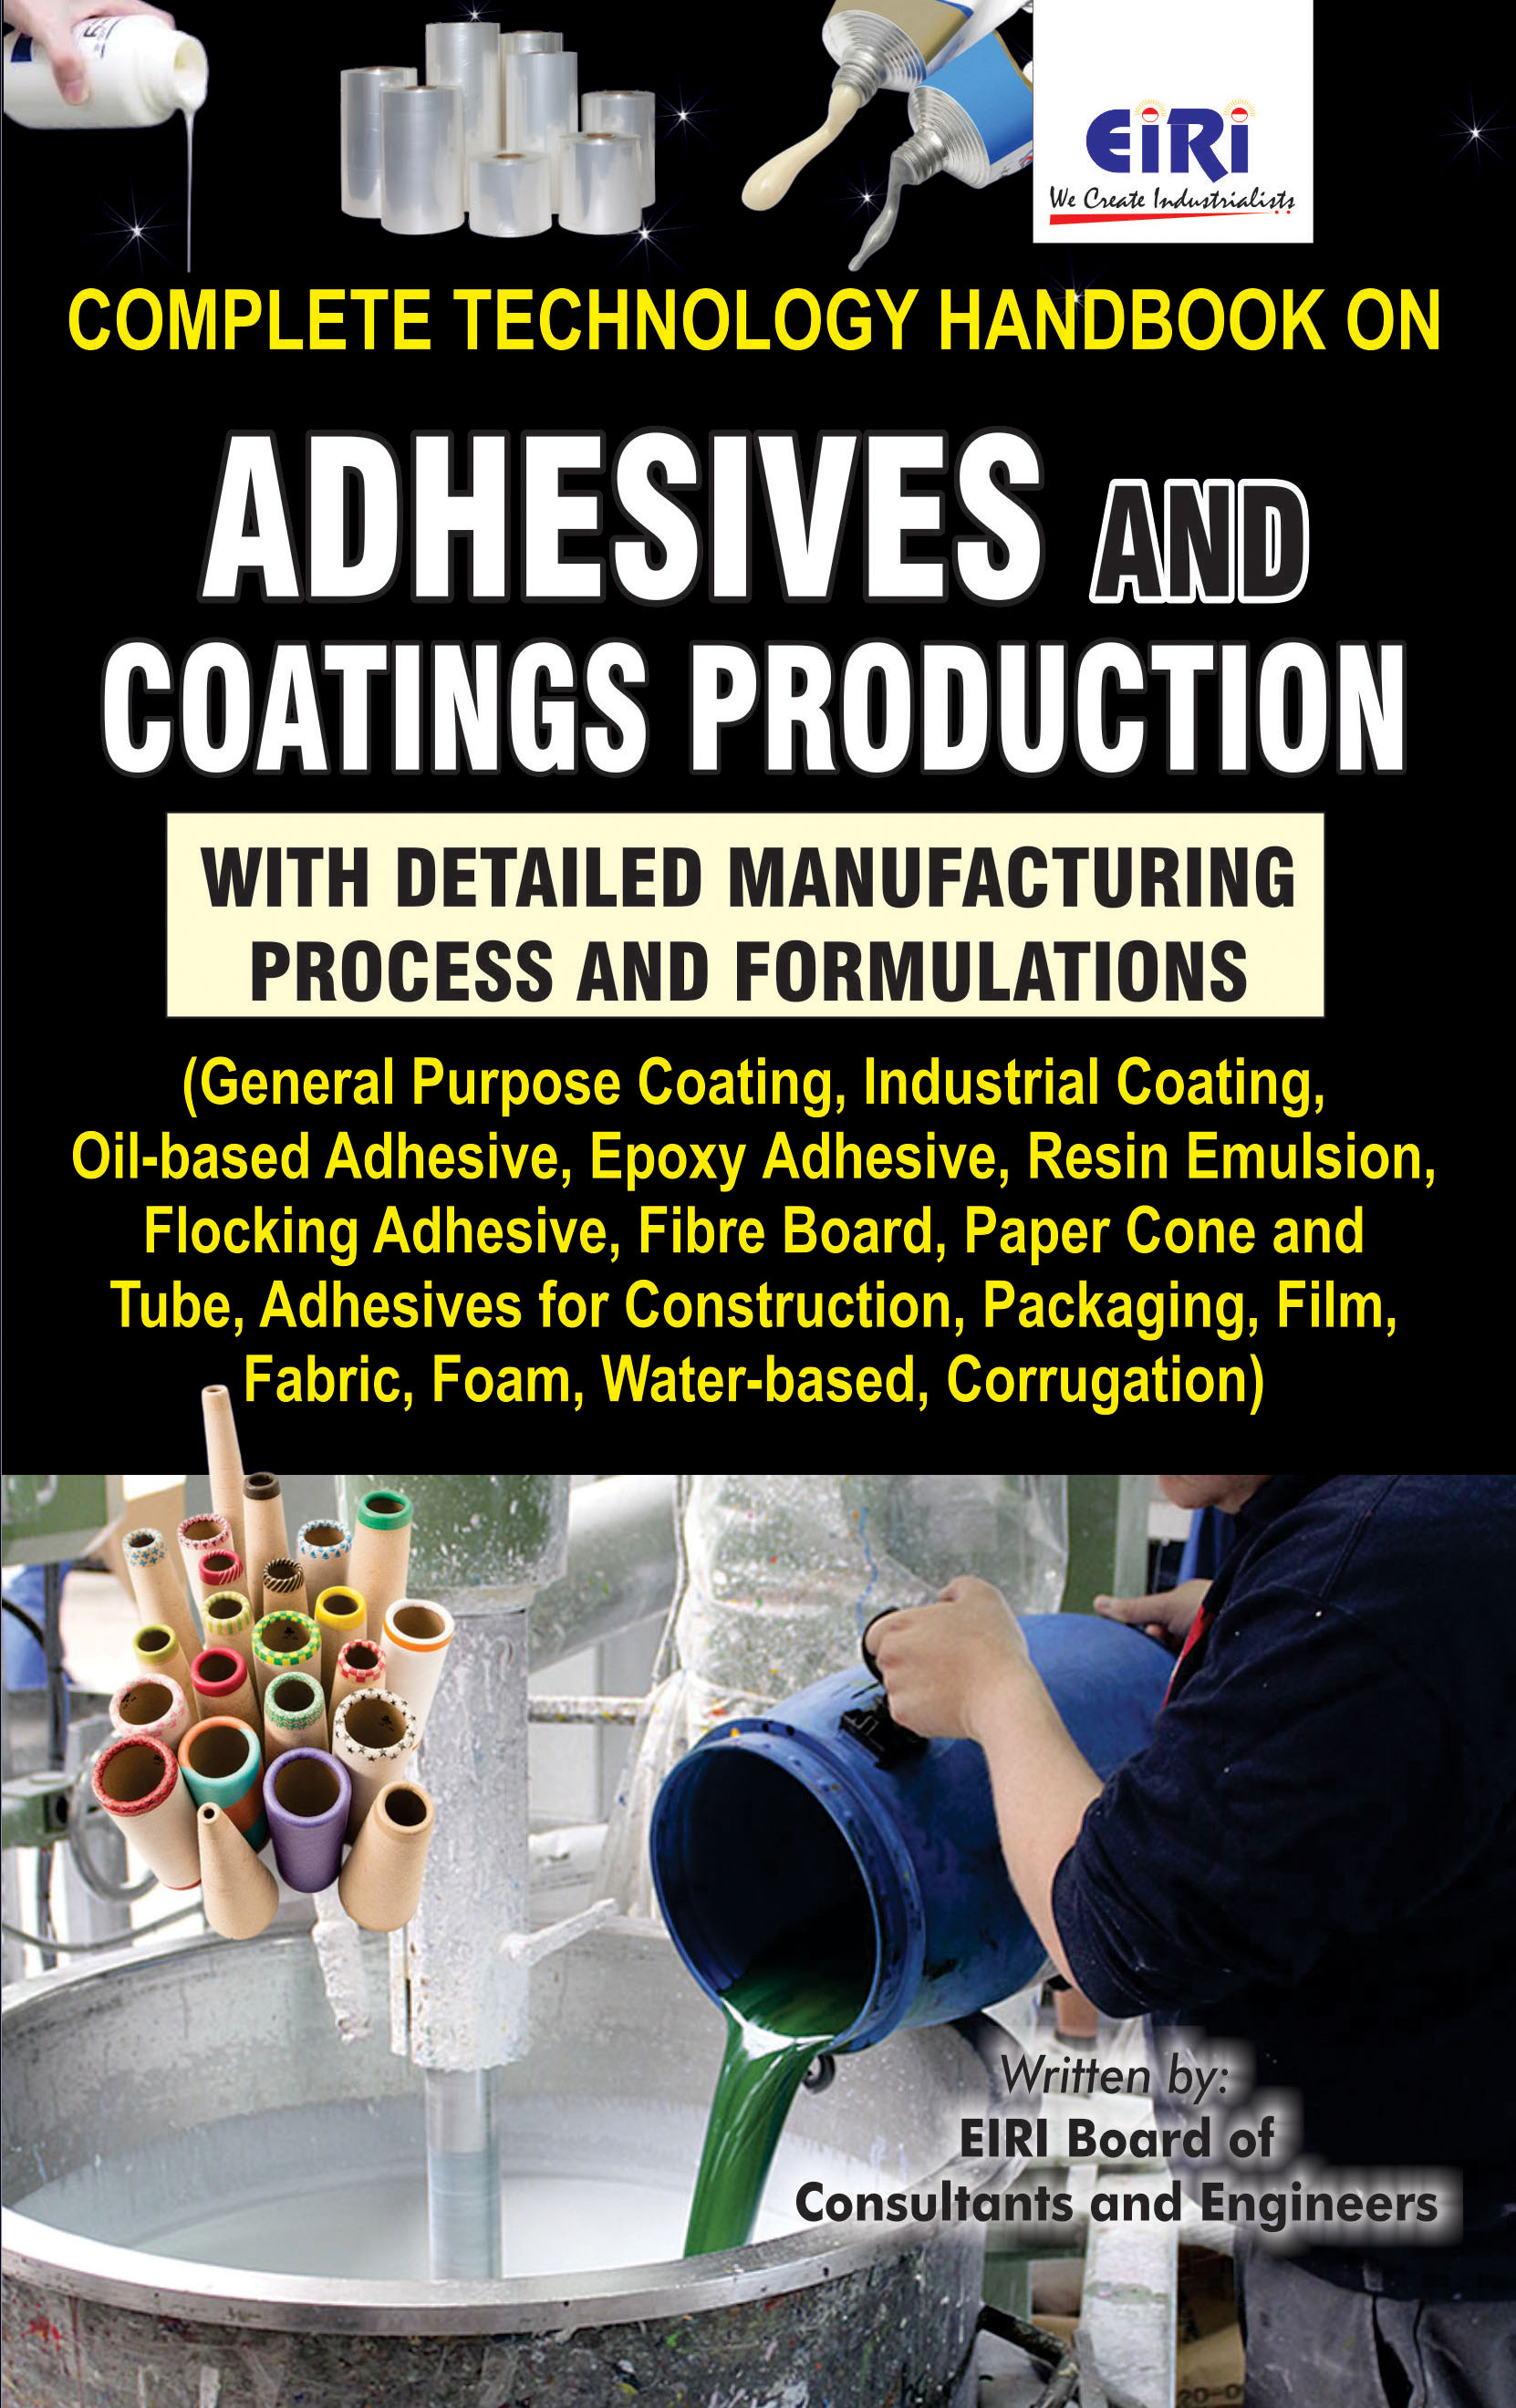 Complete Technology Handbook on Adhesives and Coatings Production with Detailed Manufacturing Process and Formulations (General Purpose Coating, Epoxy Adhesive, Resin Emulsion, Flocking Adhesive, Fibre Board, Paper Cone and Tube, Corrugation)